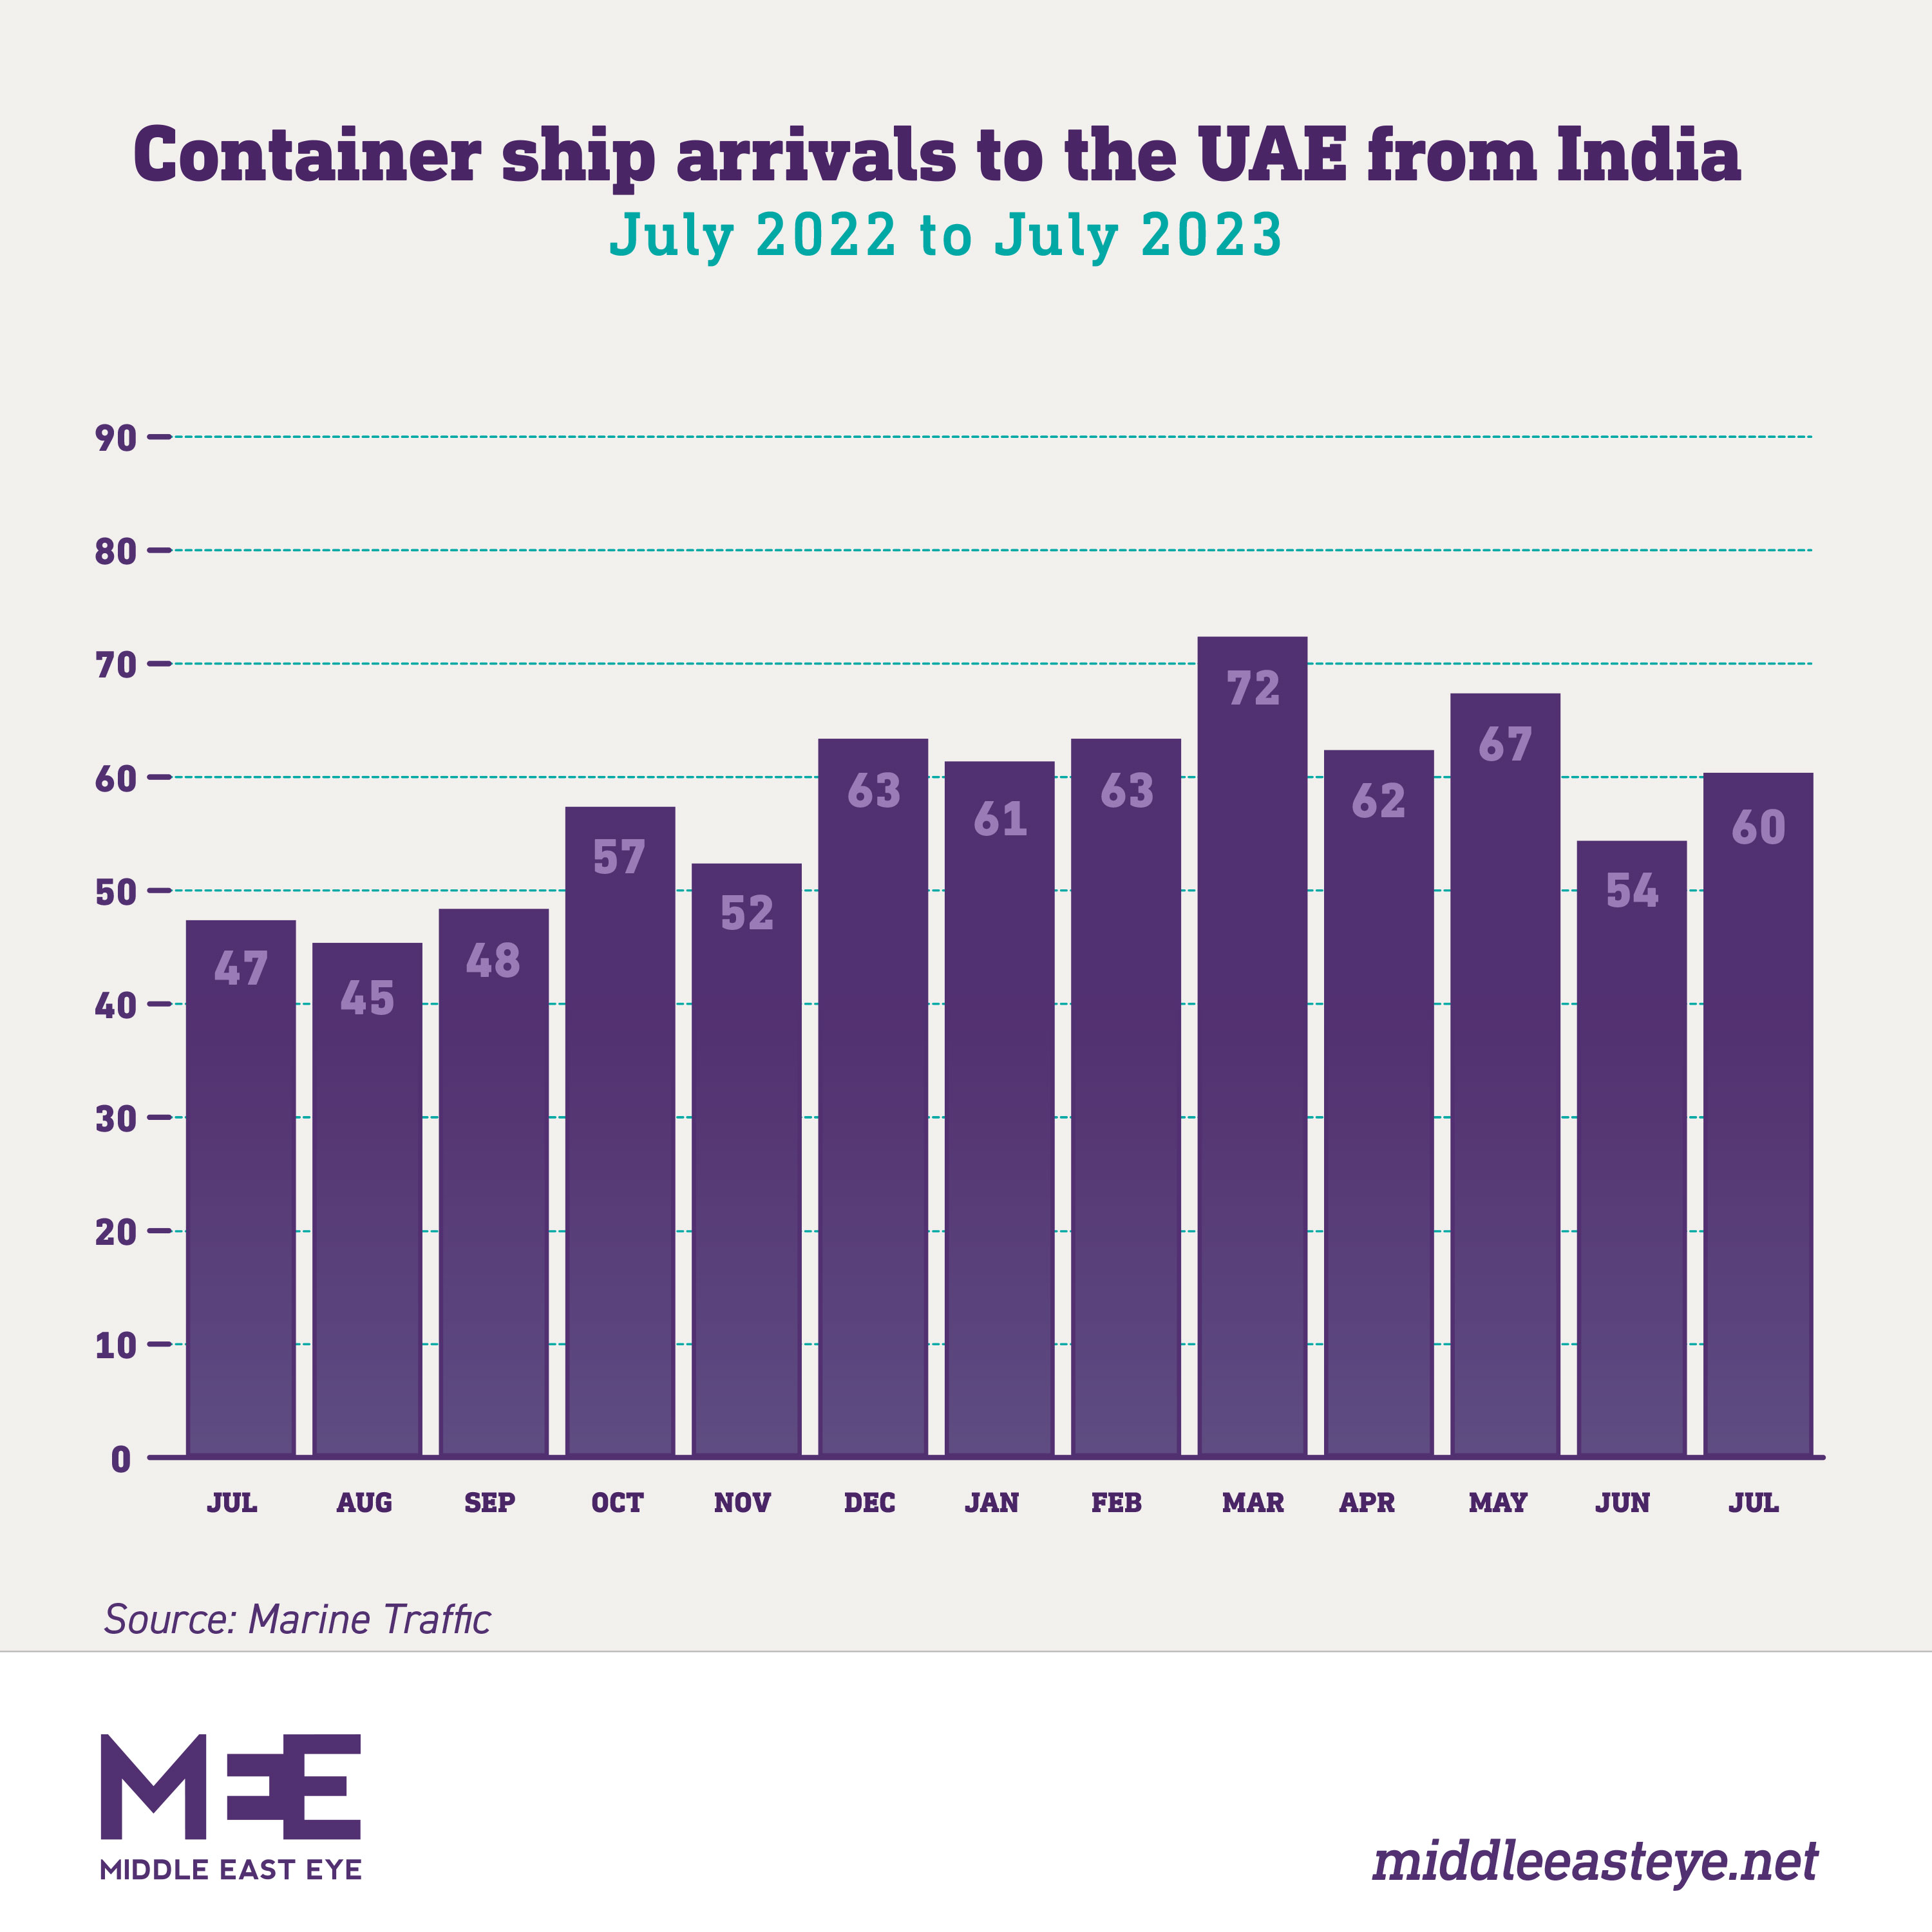 Container ship arrivals to the UAE from India (MarineTraffic)